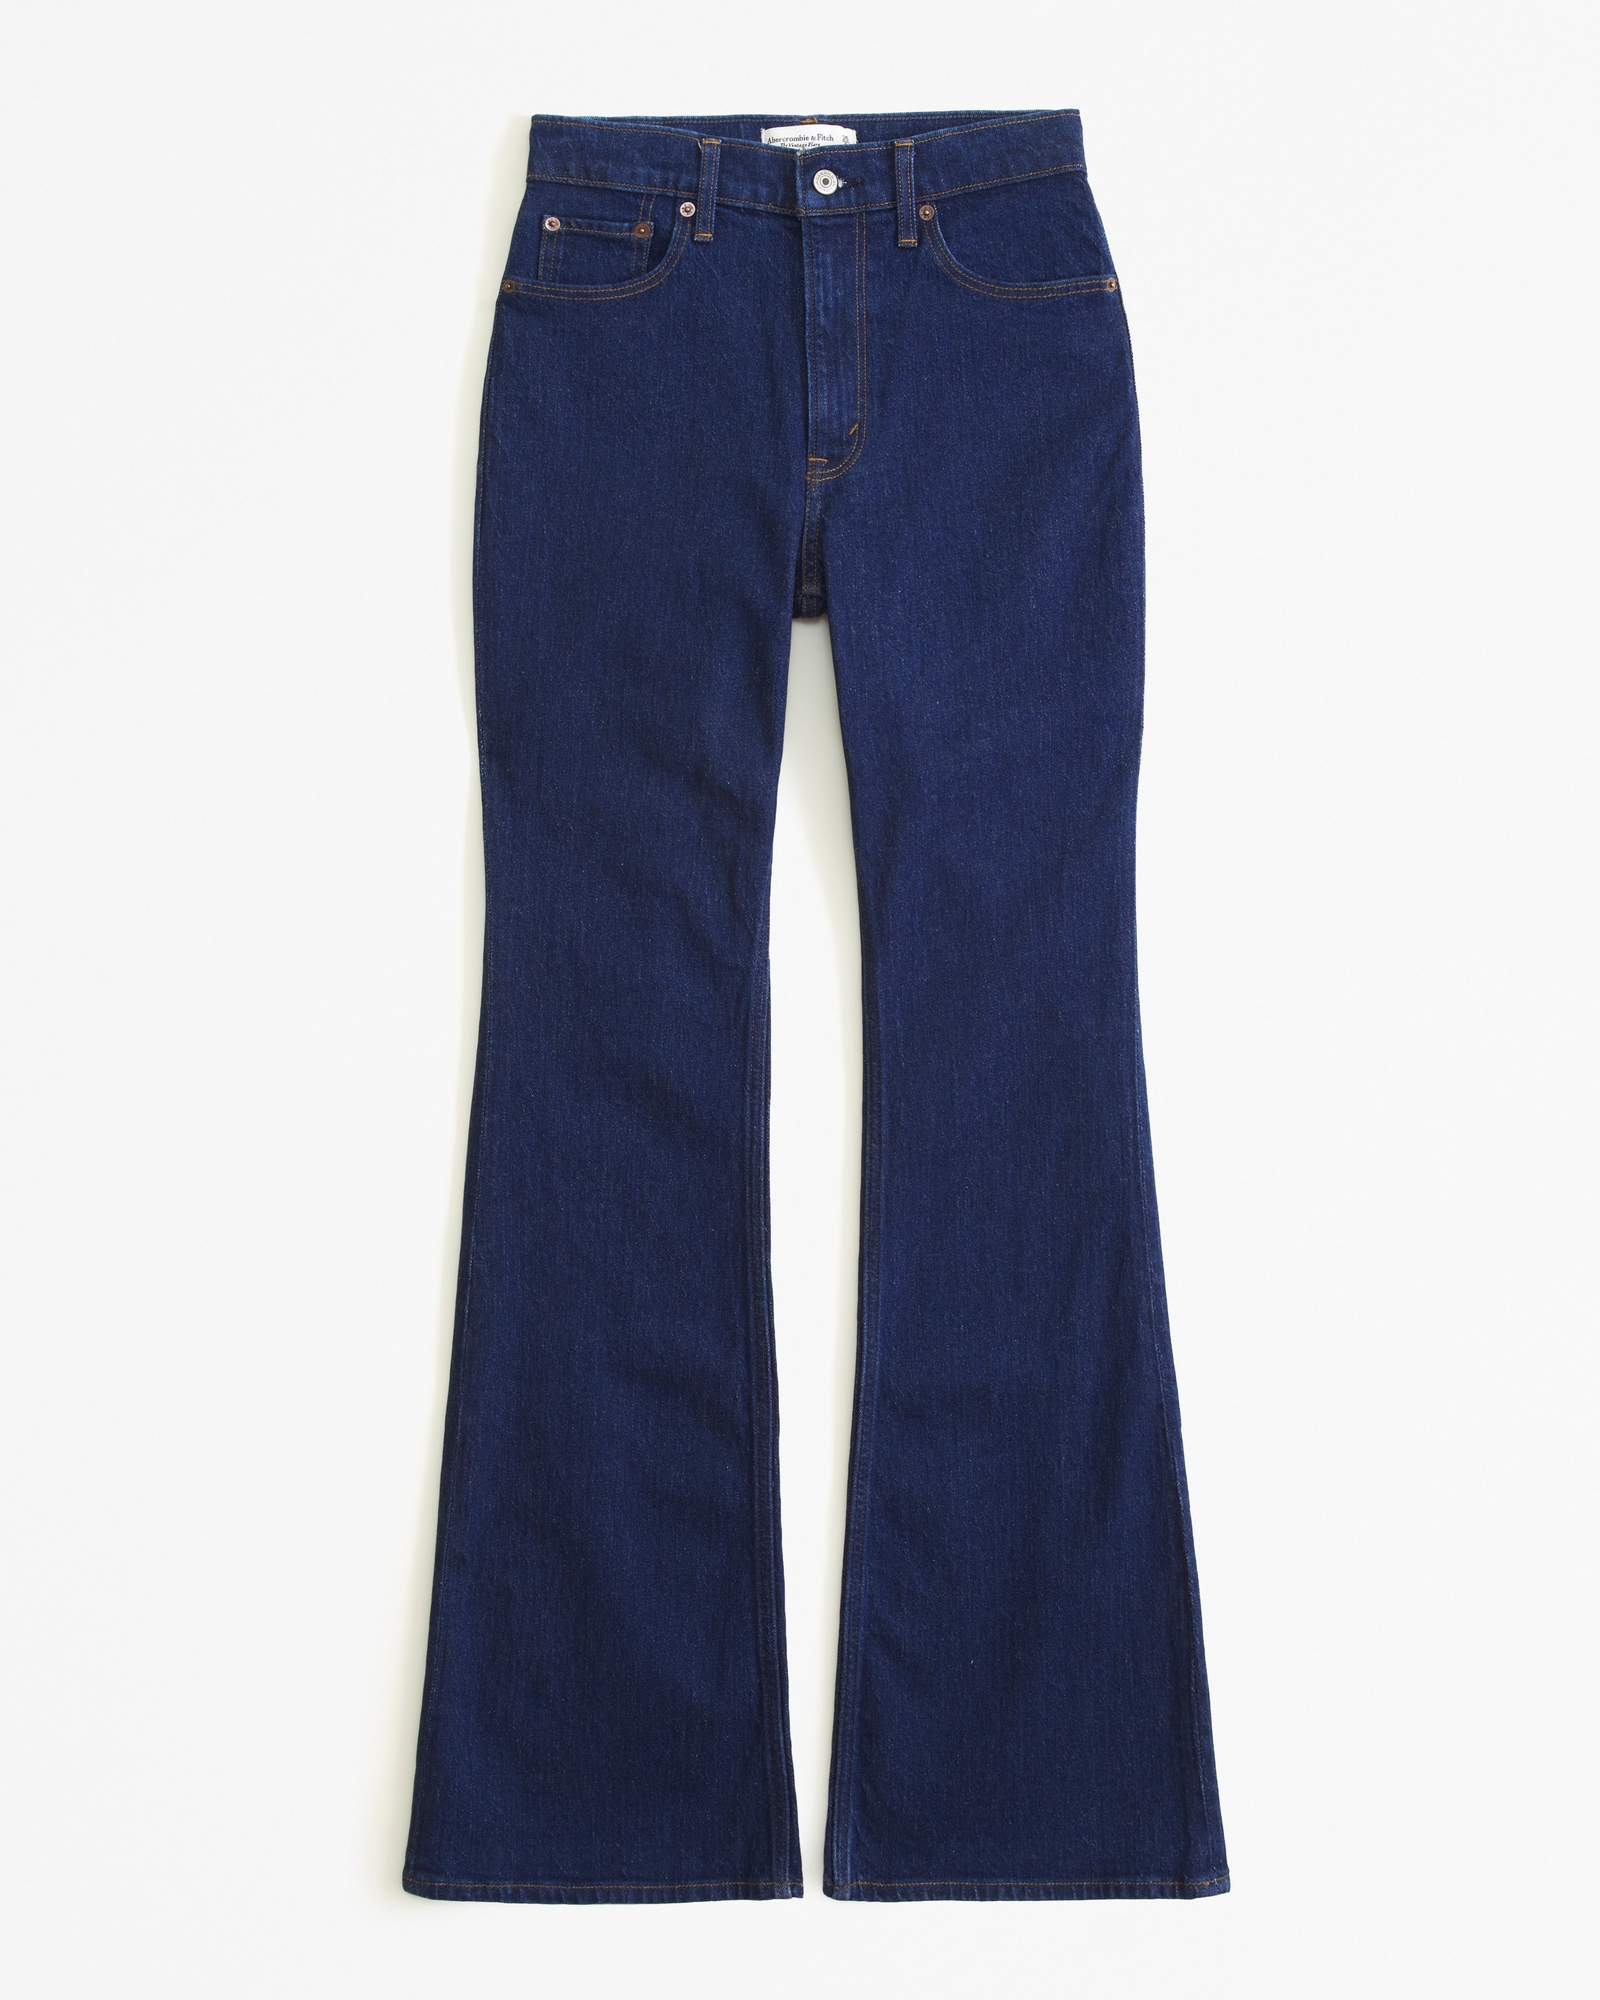 A&F High Rise Flare Jeans  Flare jeans, Fashion, Women jeans